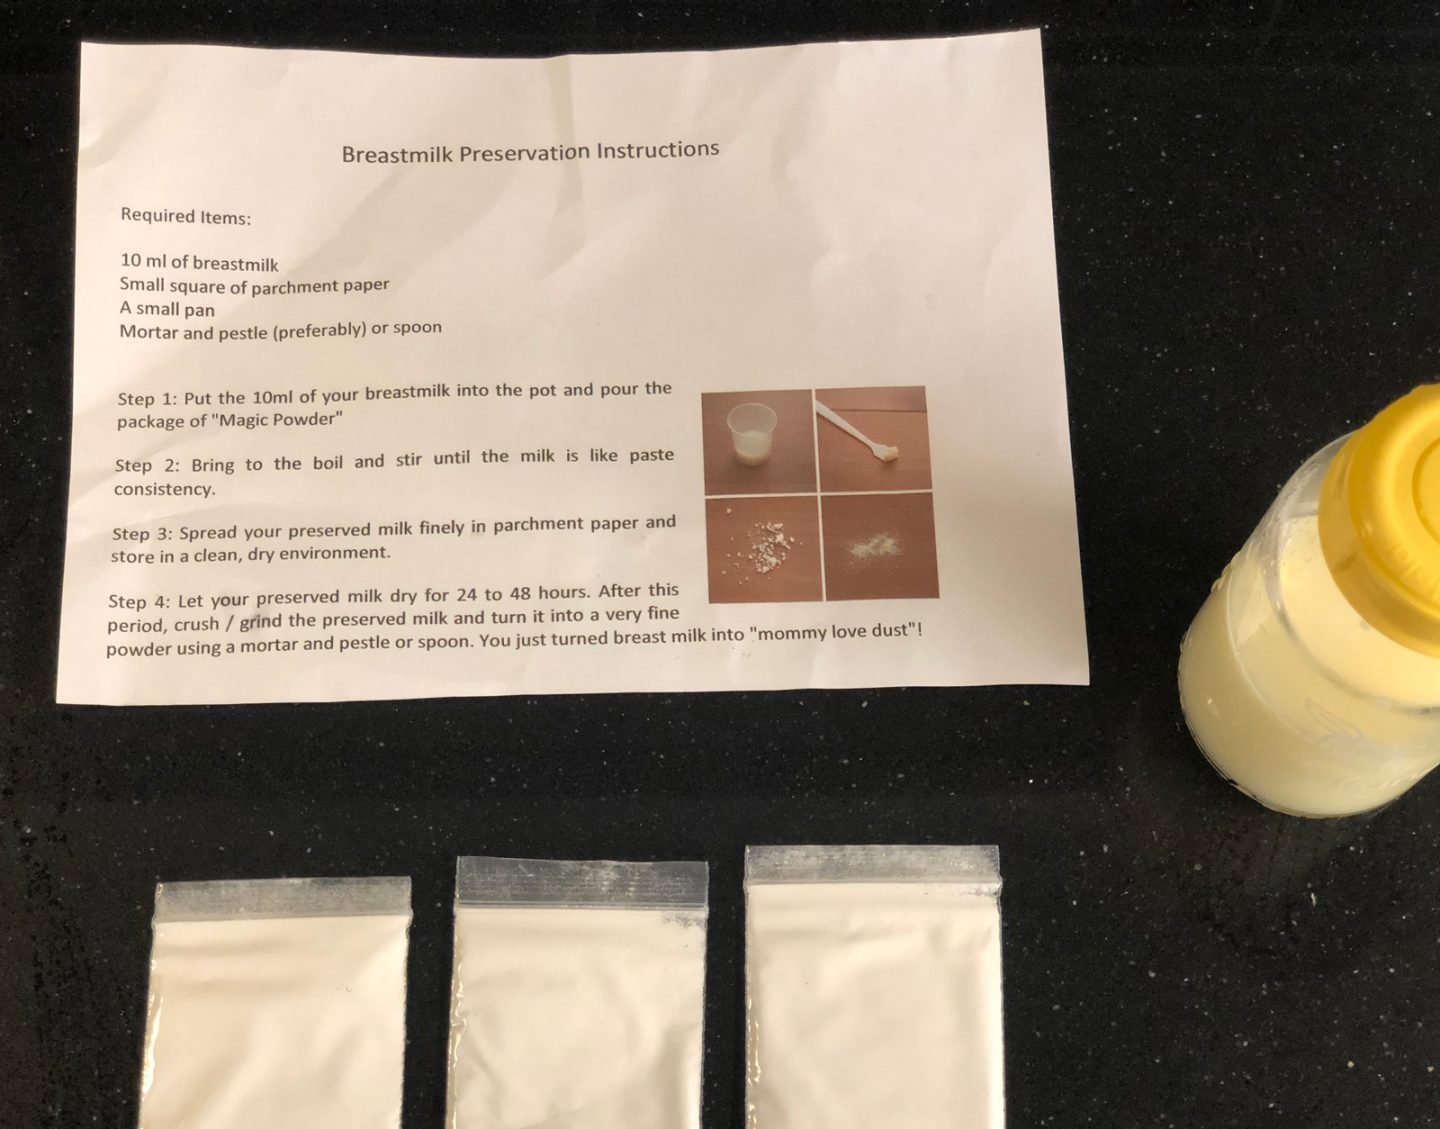 "Magic powder" purchased online to solidify and preserve breastmilk